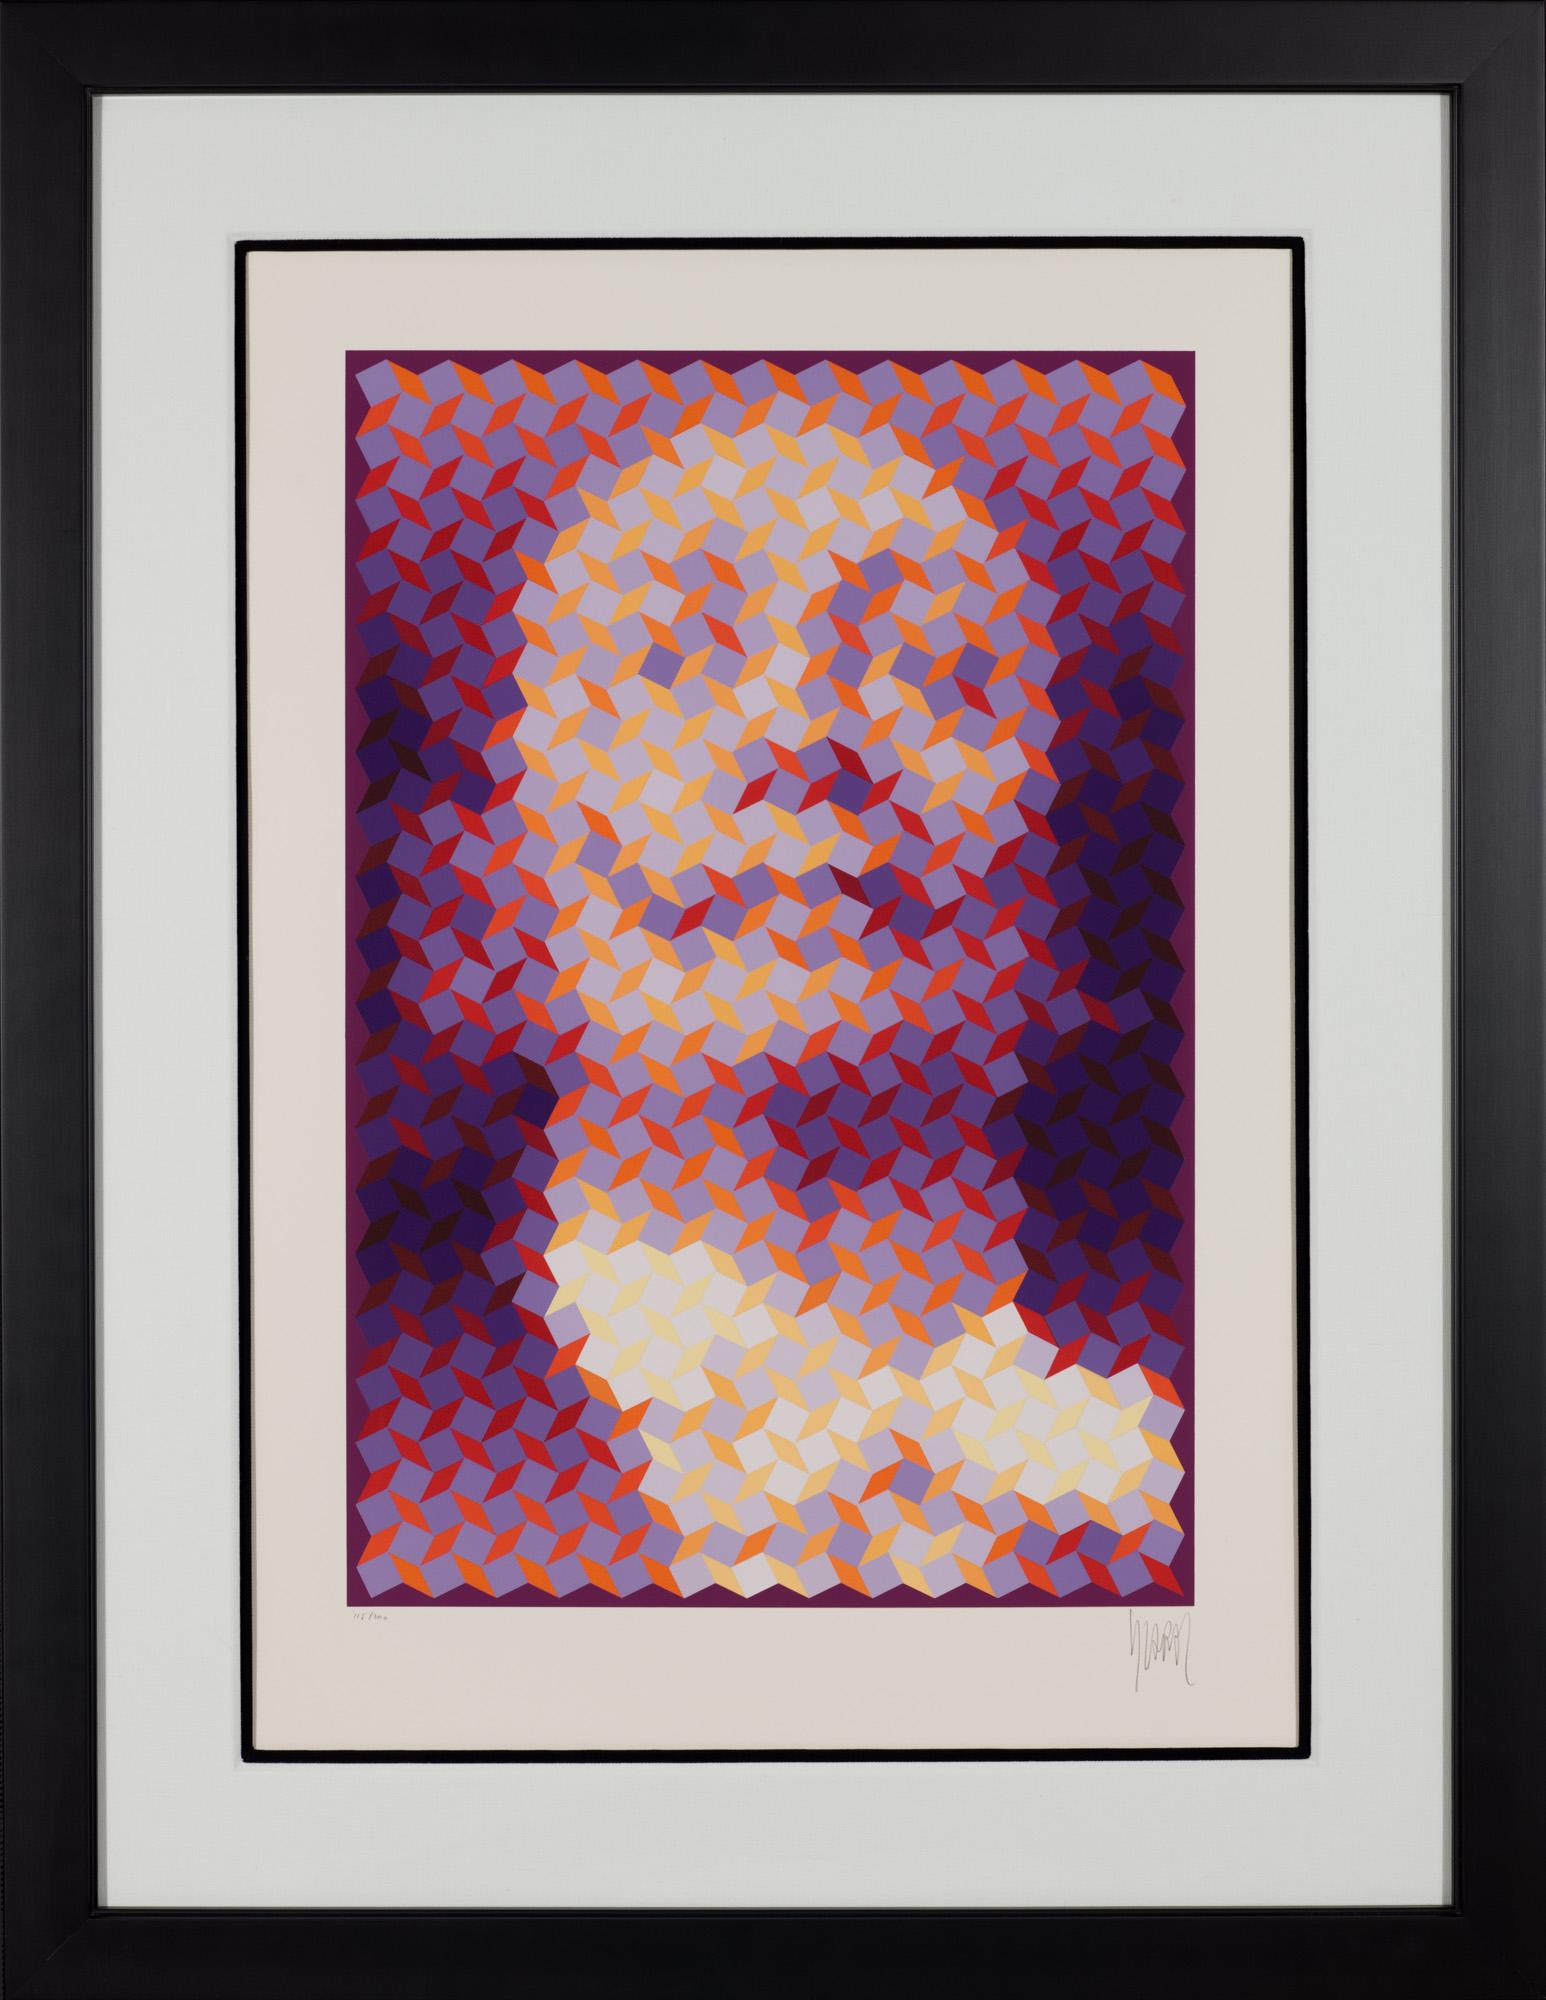 Faces of Dali #6 - Print by Yvaral (Jean-Pierre Vasarely)